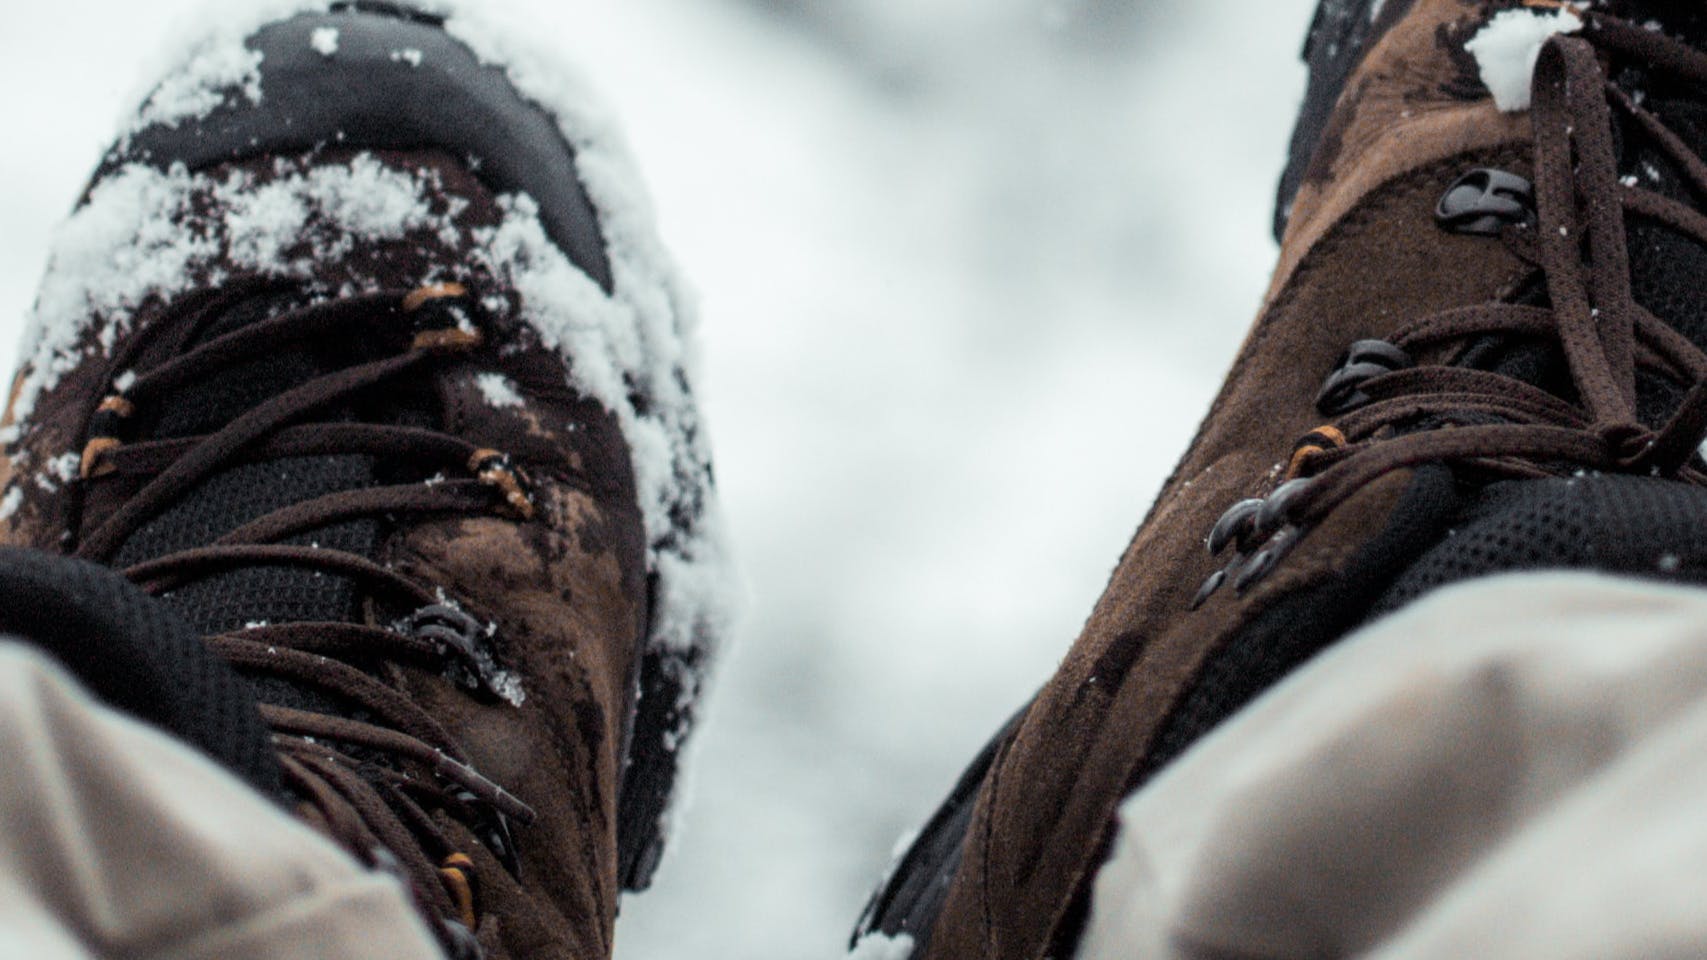 Closeup on winter boots dusted with snow